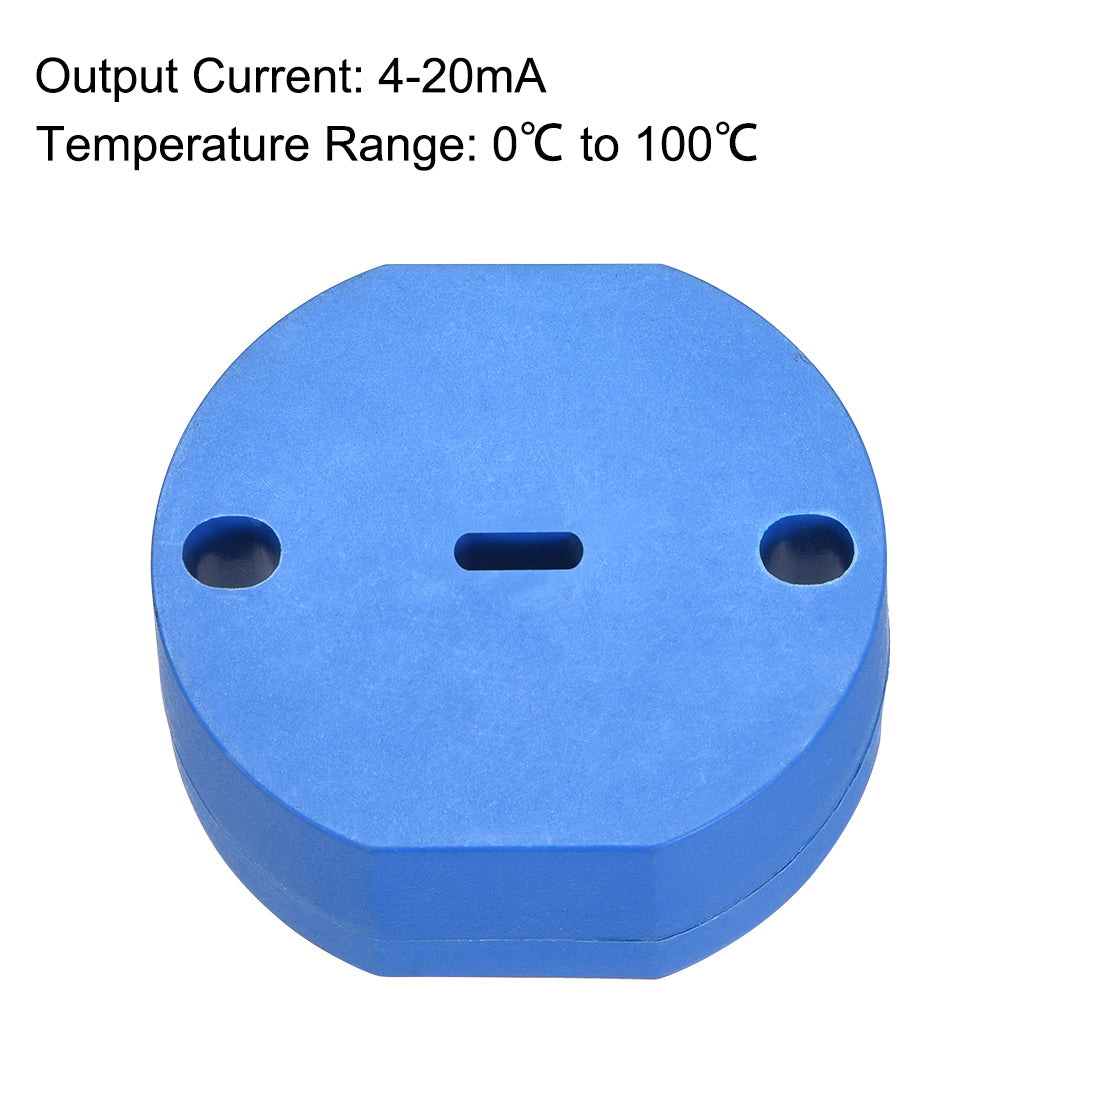 uxcell Uxcell PT100 Temperature Sensor Transmitter 24V DC 4-20mA 0℃ to 100℃